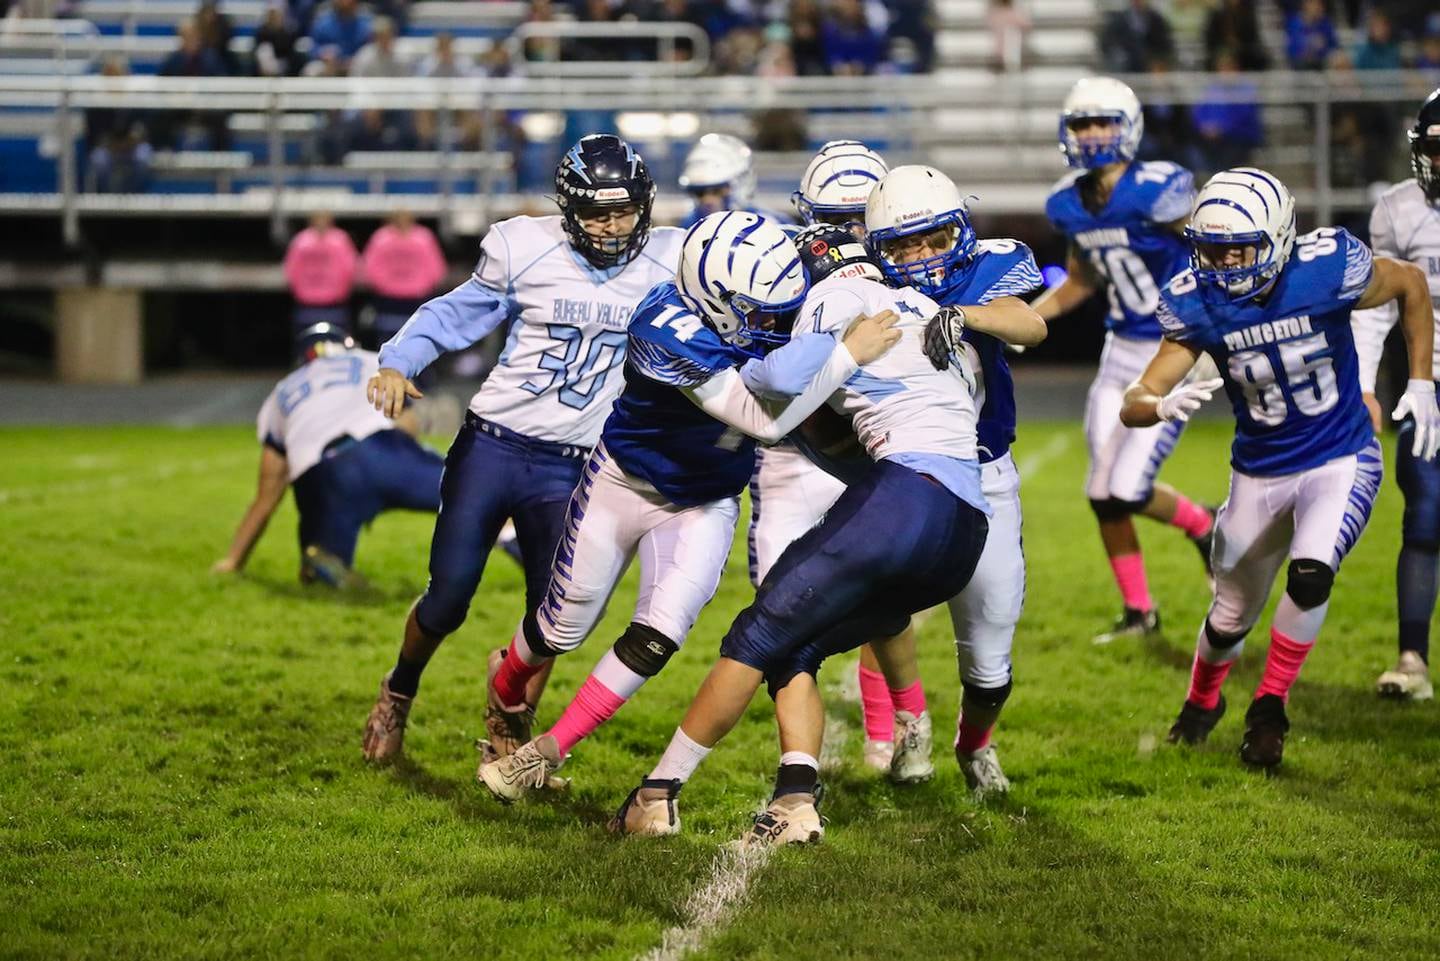 Princeton's Evan Driscoll (14) gets some help bringing down Bureau Valley's Brock Foster Friday night at Bryant Field.